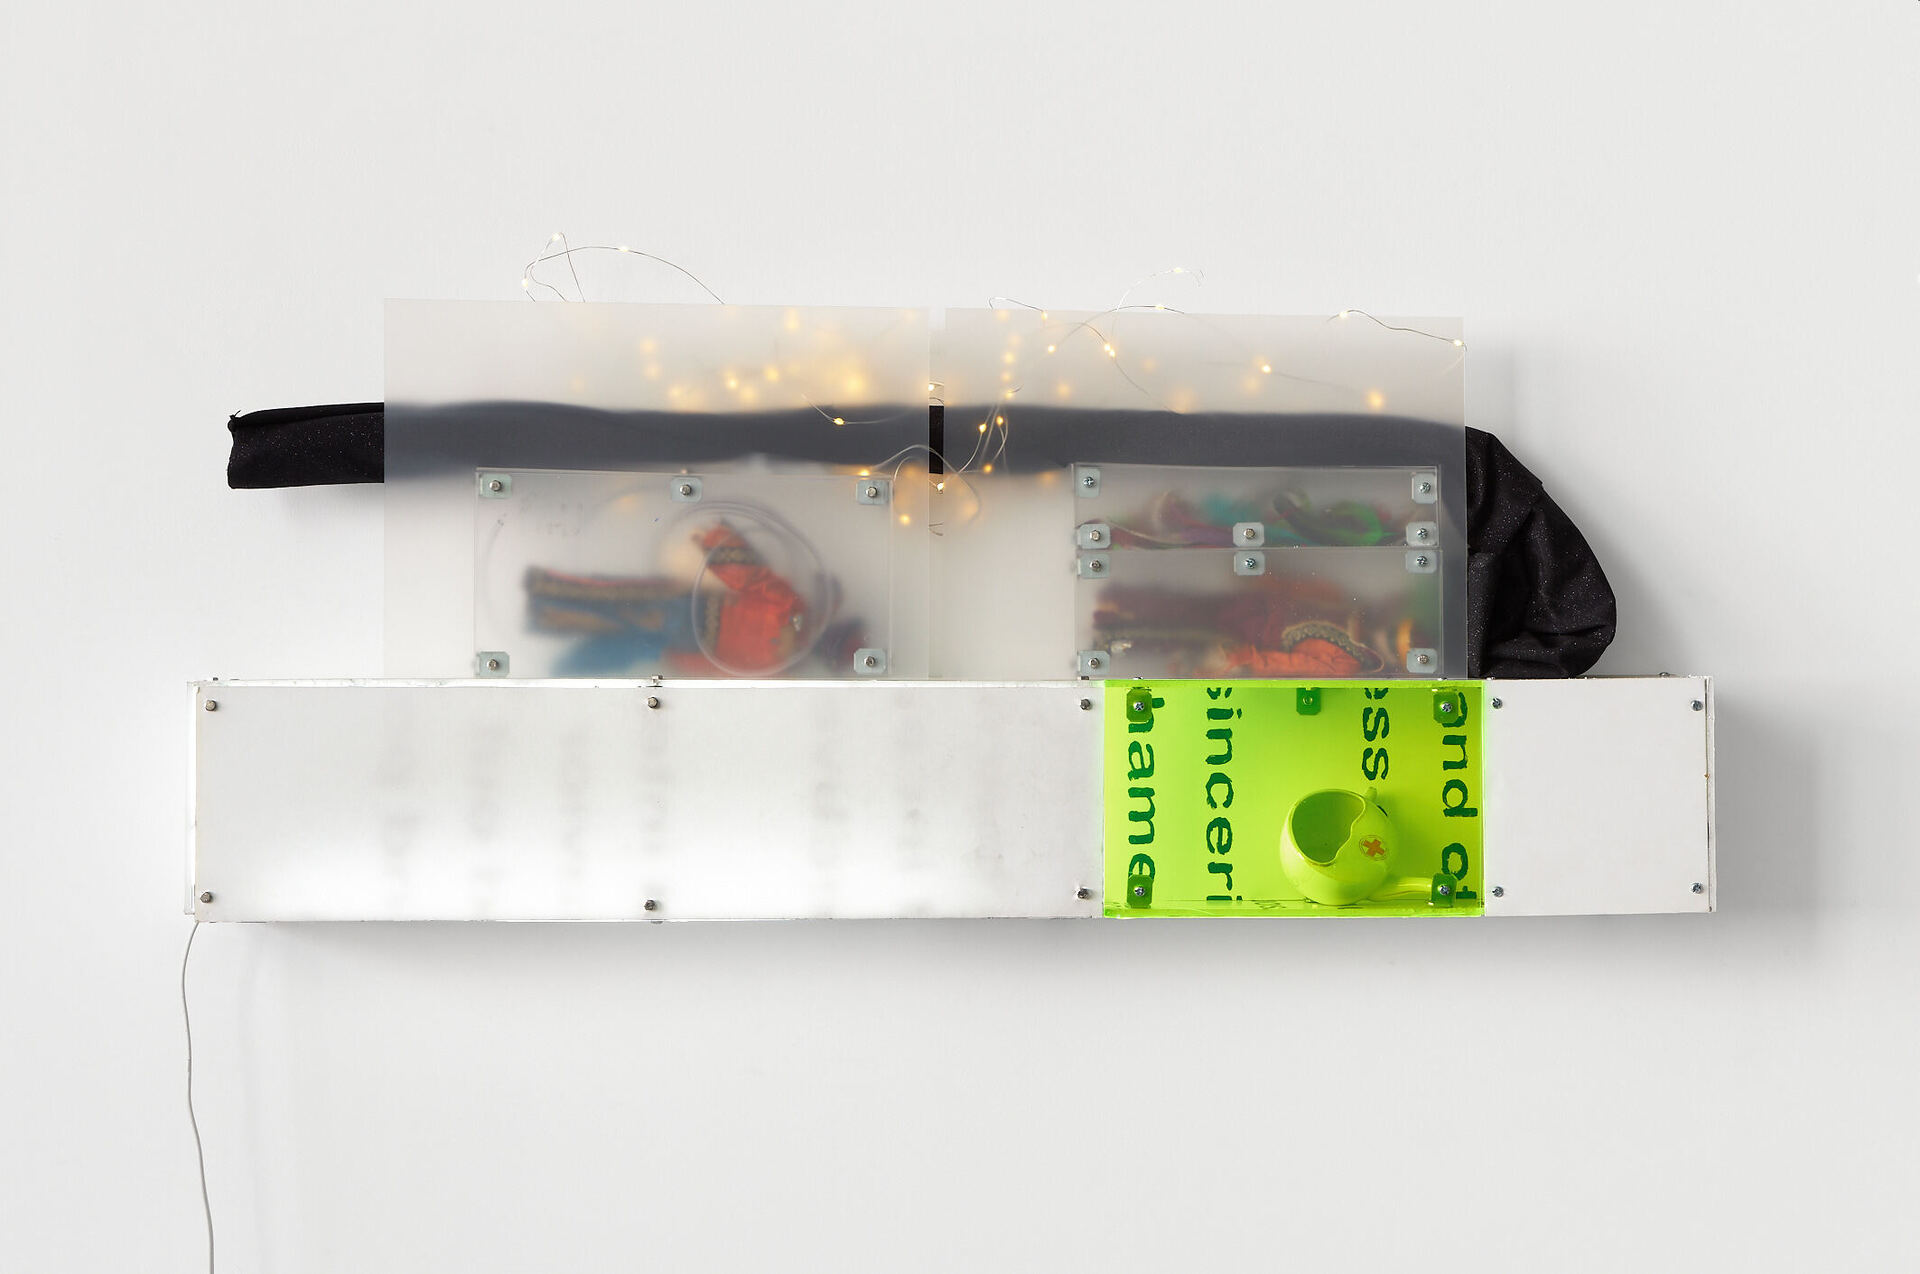 foreign object, 2021 Foam core components from Moral Inventory (2020), Perspex, polypropylene, steel joiners, antique Chinese puppets, feathers, beads, PVC tubing, fabric, fairy lights, LED light component, antique Red Cross invalid feeding cup